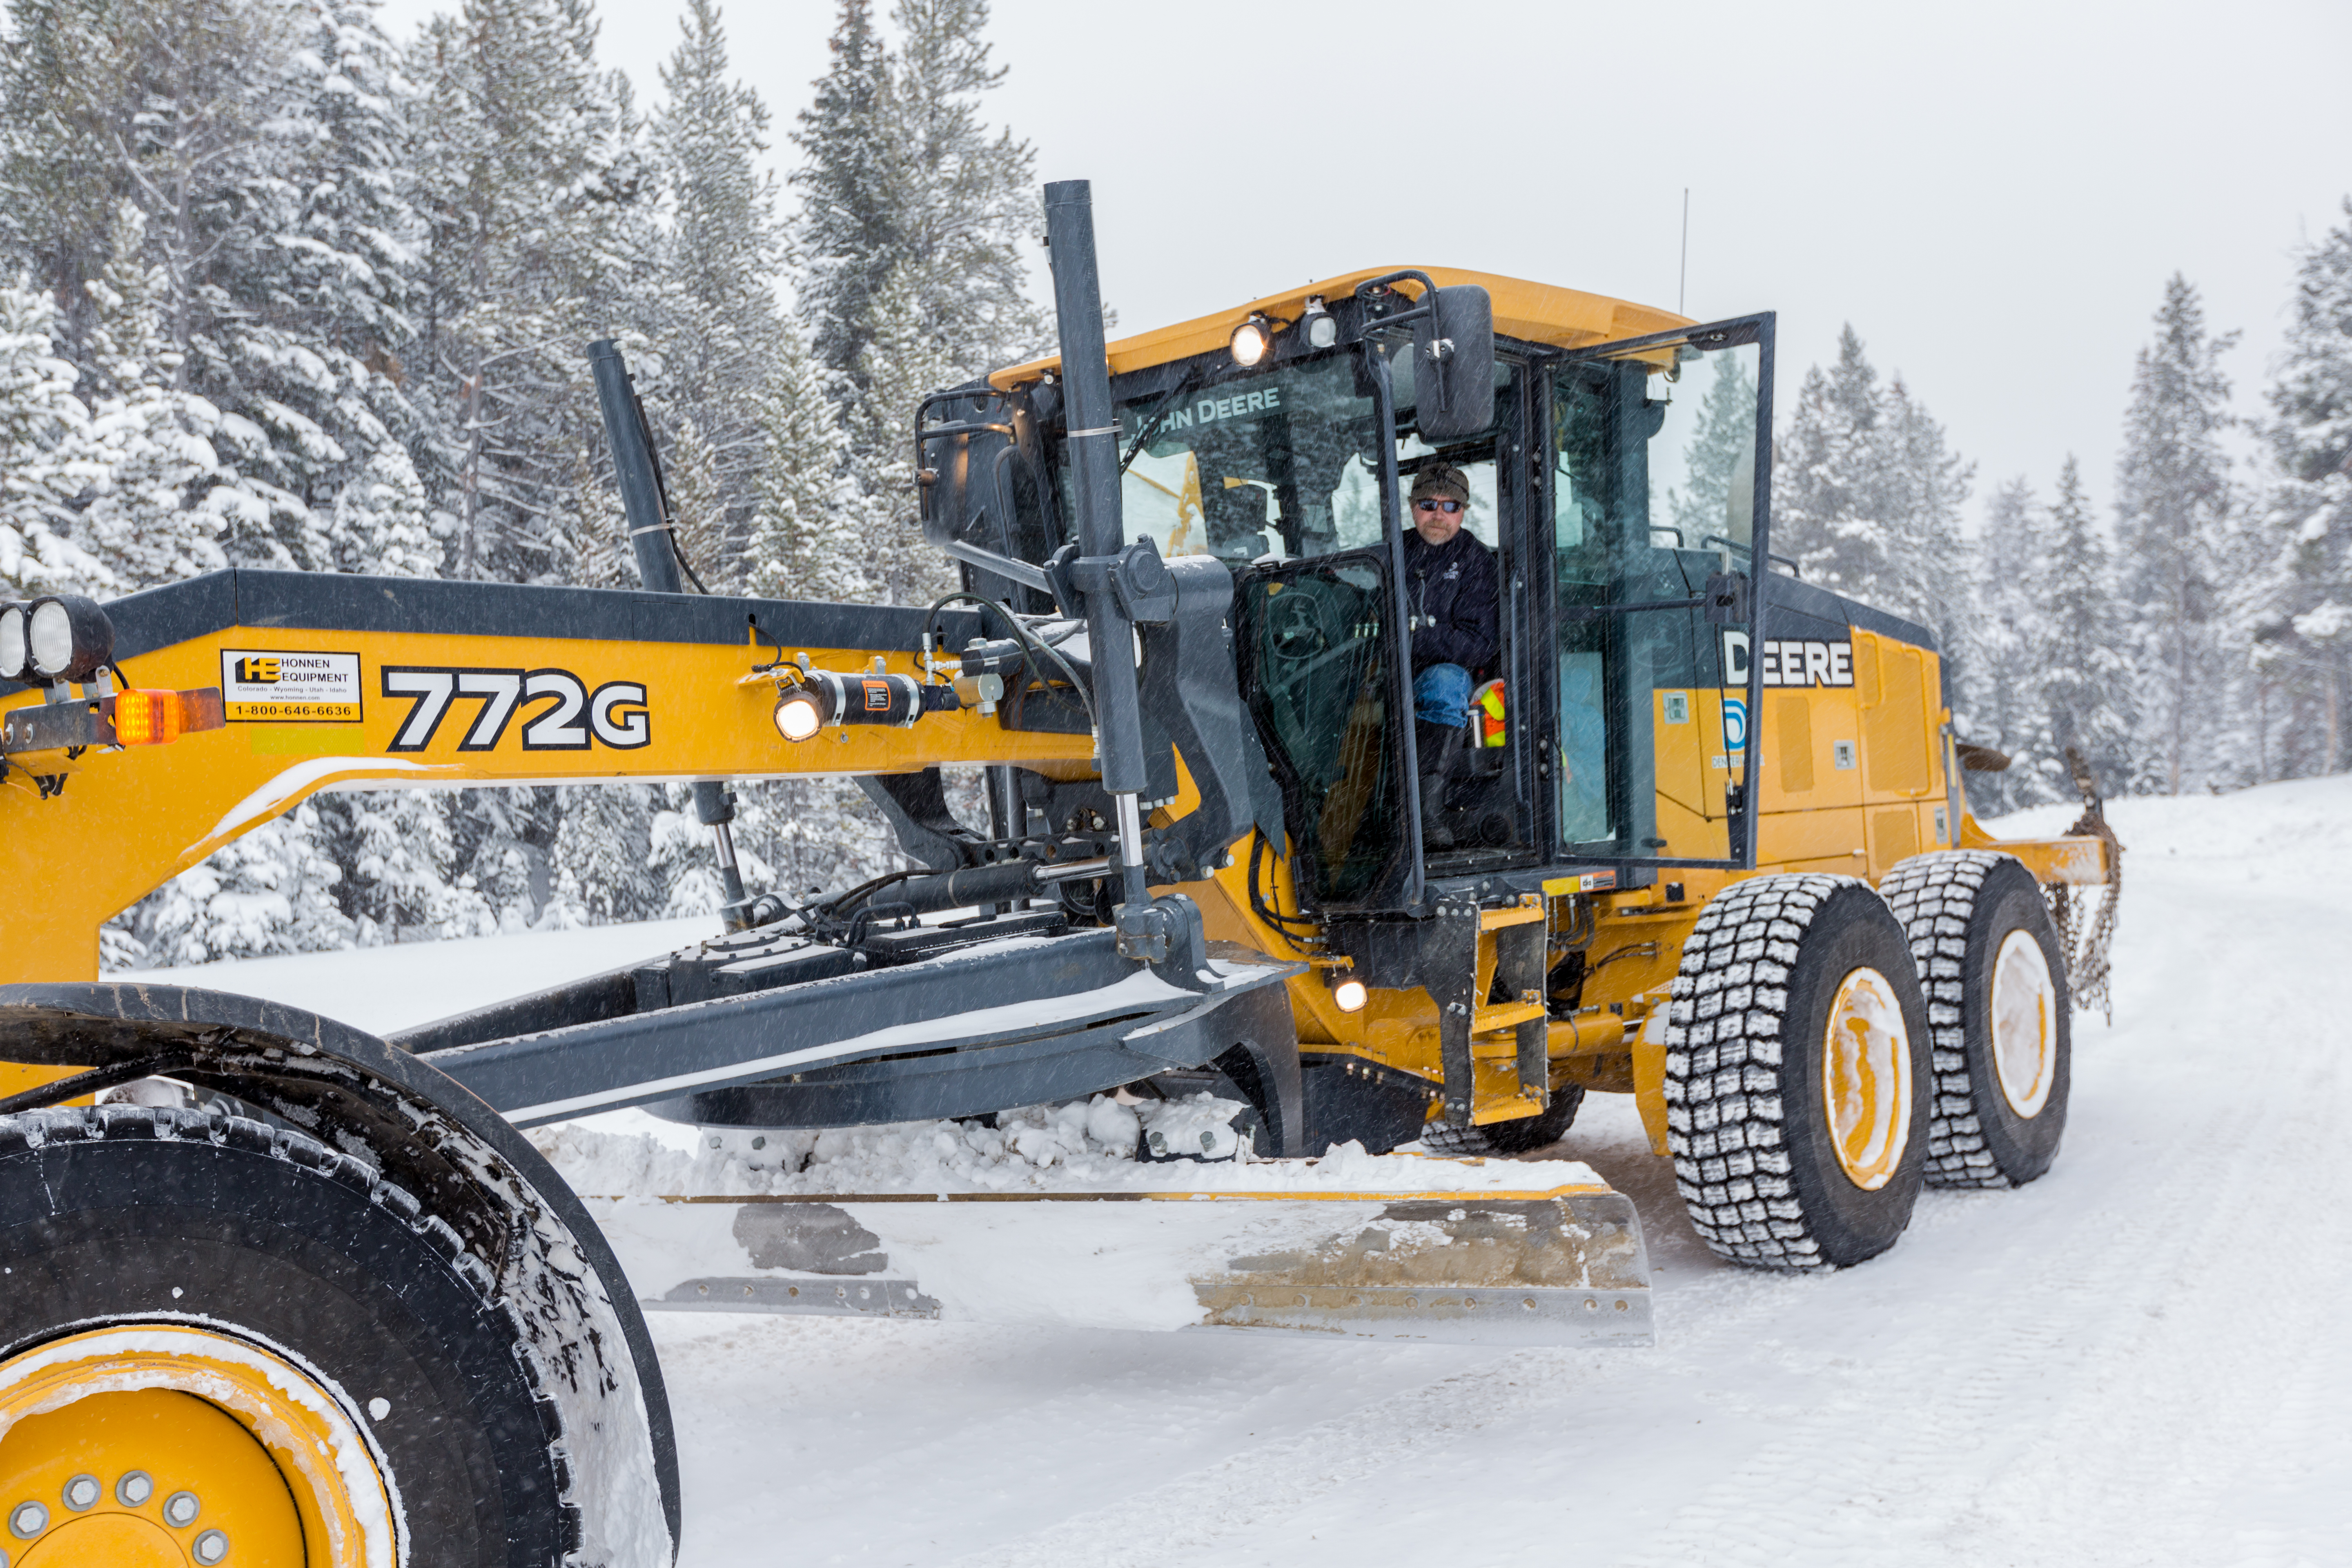 Rod Weimer plowing snow near Winter Park, Colo.